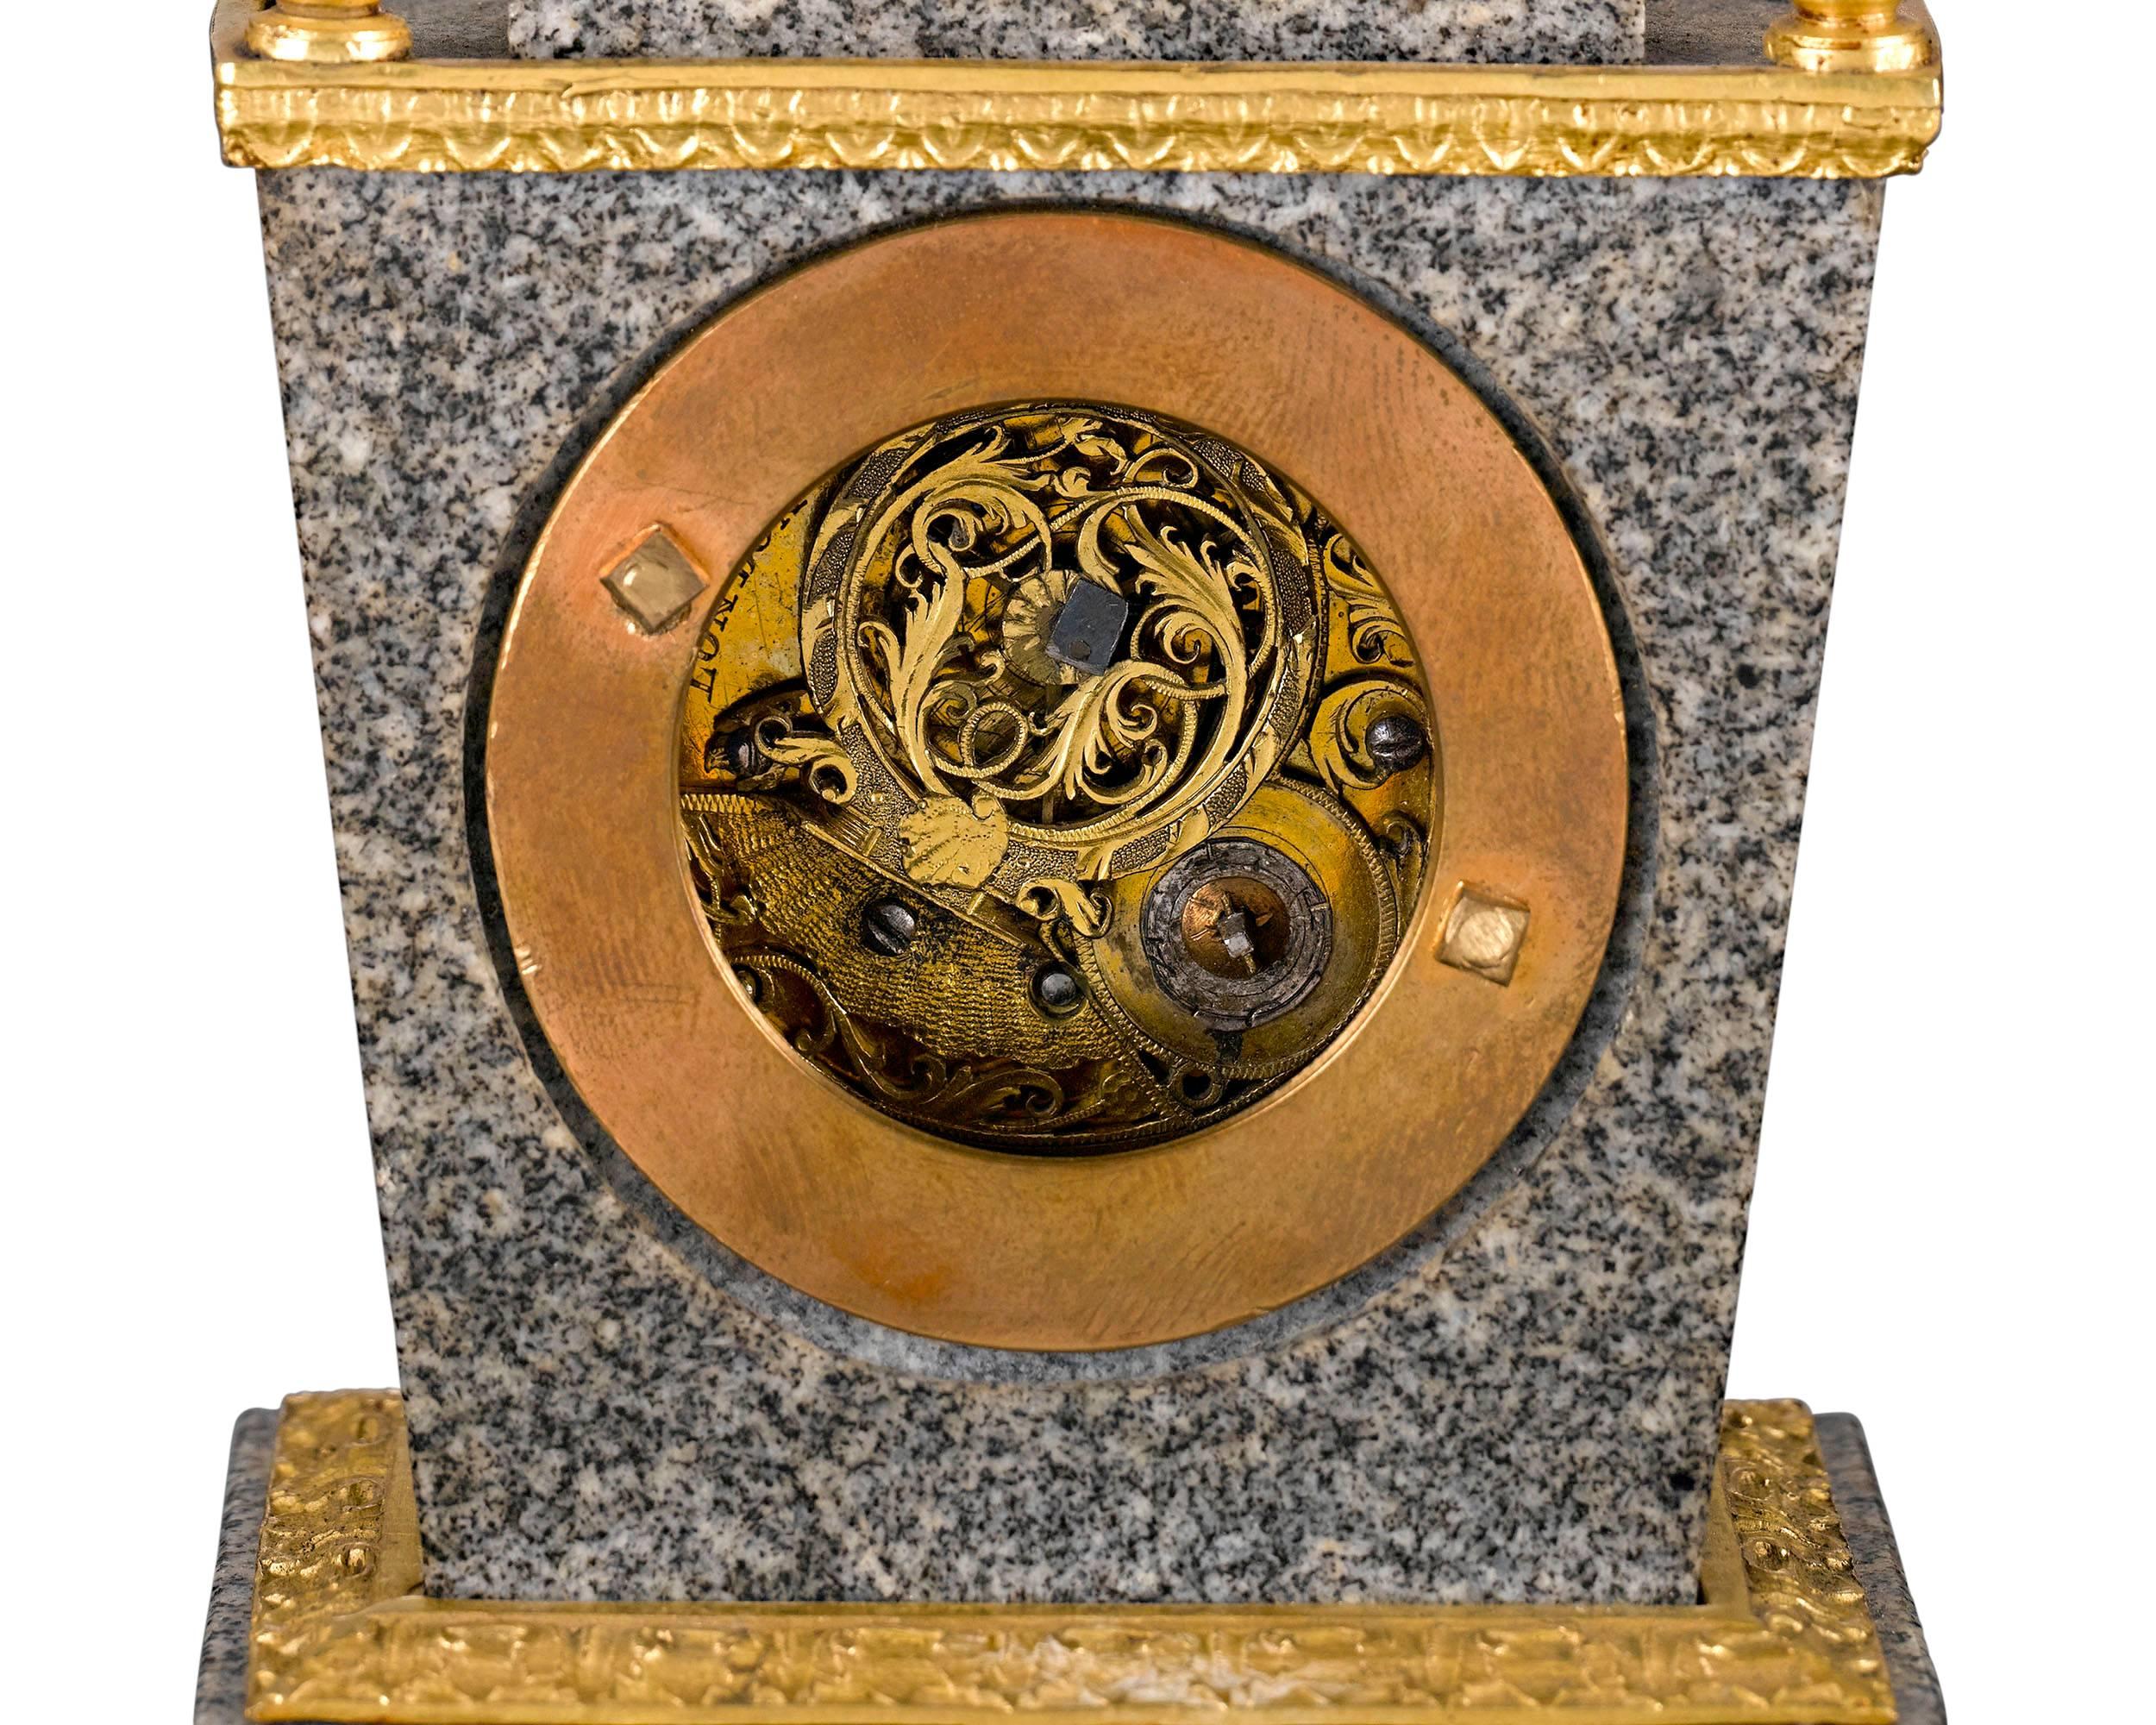 A case of exquisite porphyry and doré bronze houses the verge movement of this rare clock by eminent English clock and watch maker John Ellicott. Ellicott's creations are considered the finest English timepieces of the 18th century, and his